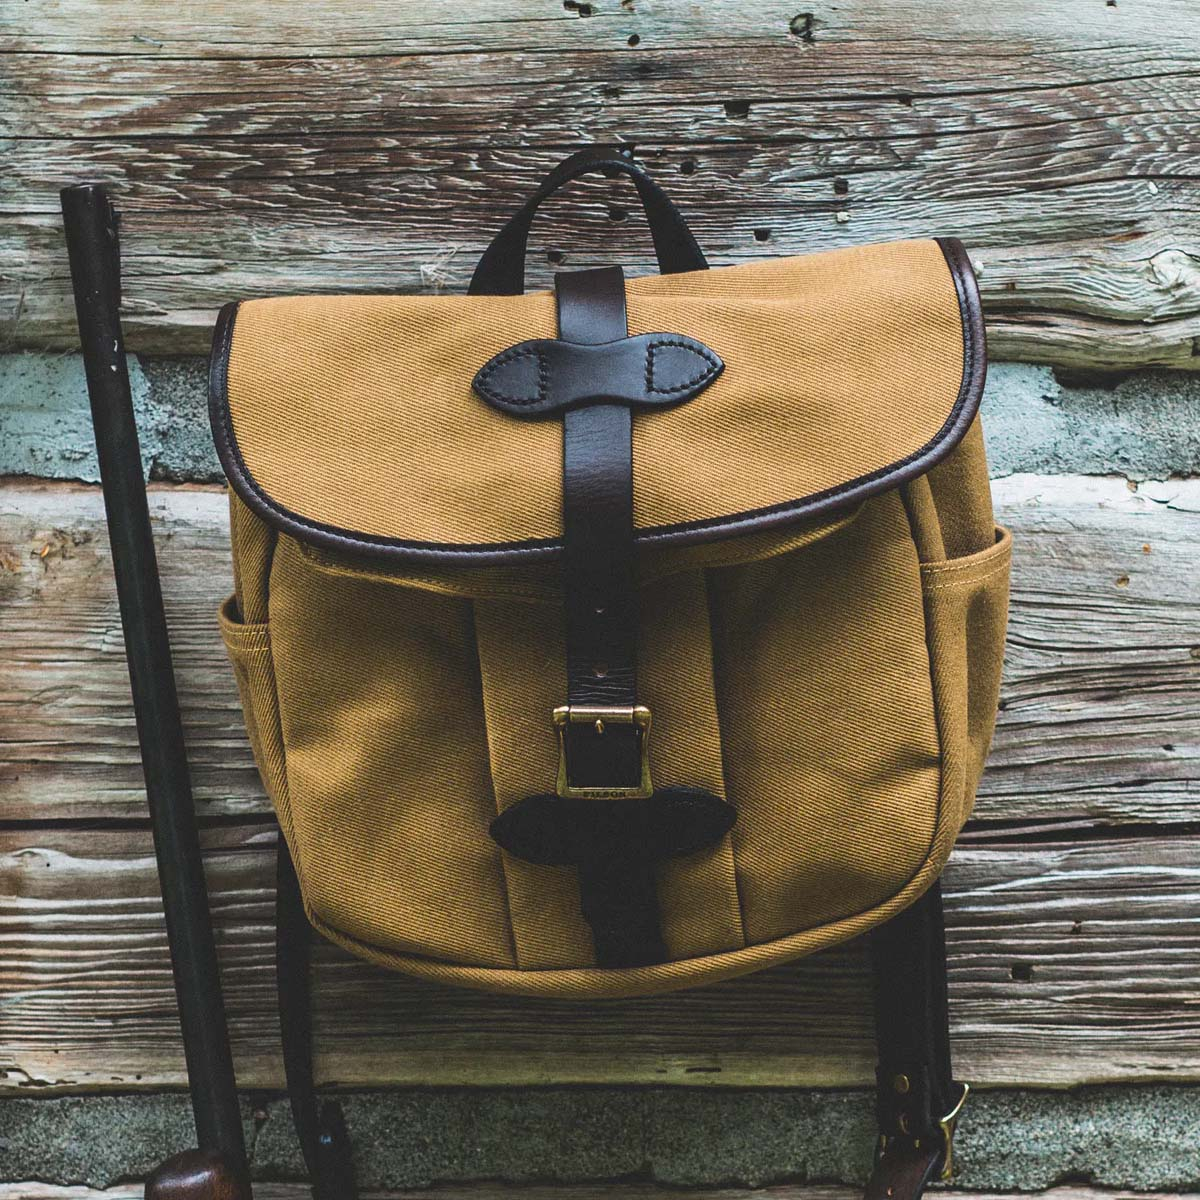 Filson Field Bag Small Tan 11070230 is de perfecte tas voor the man or woman on the go